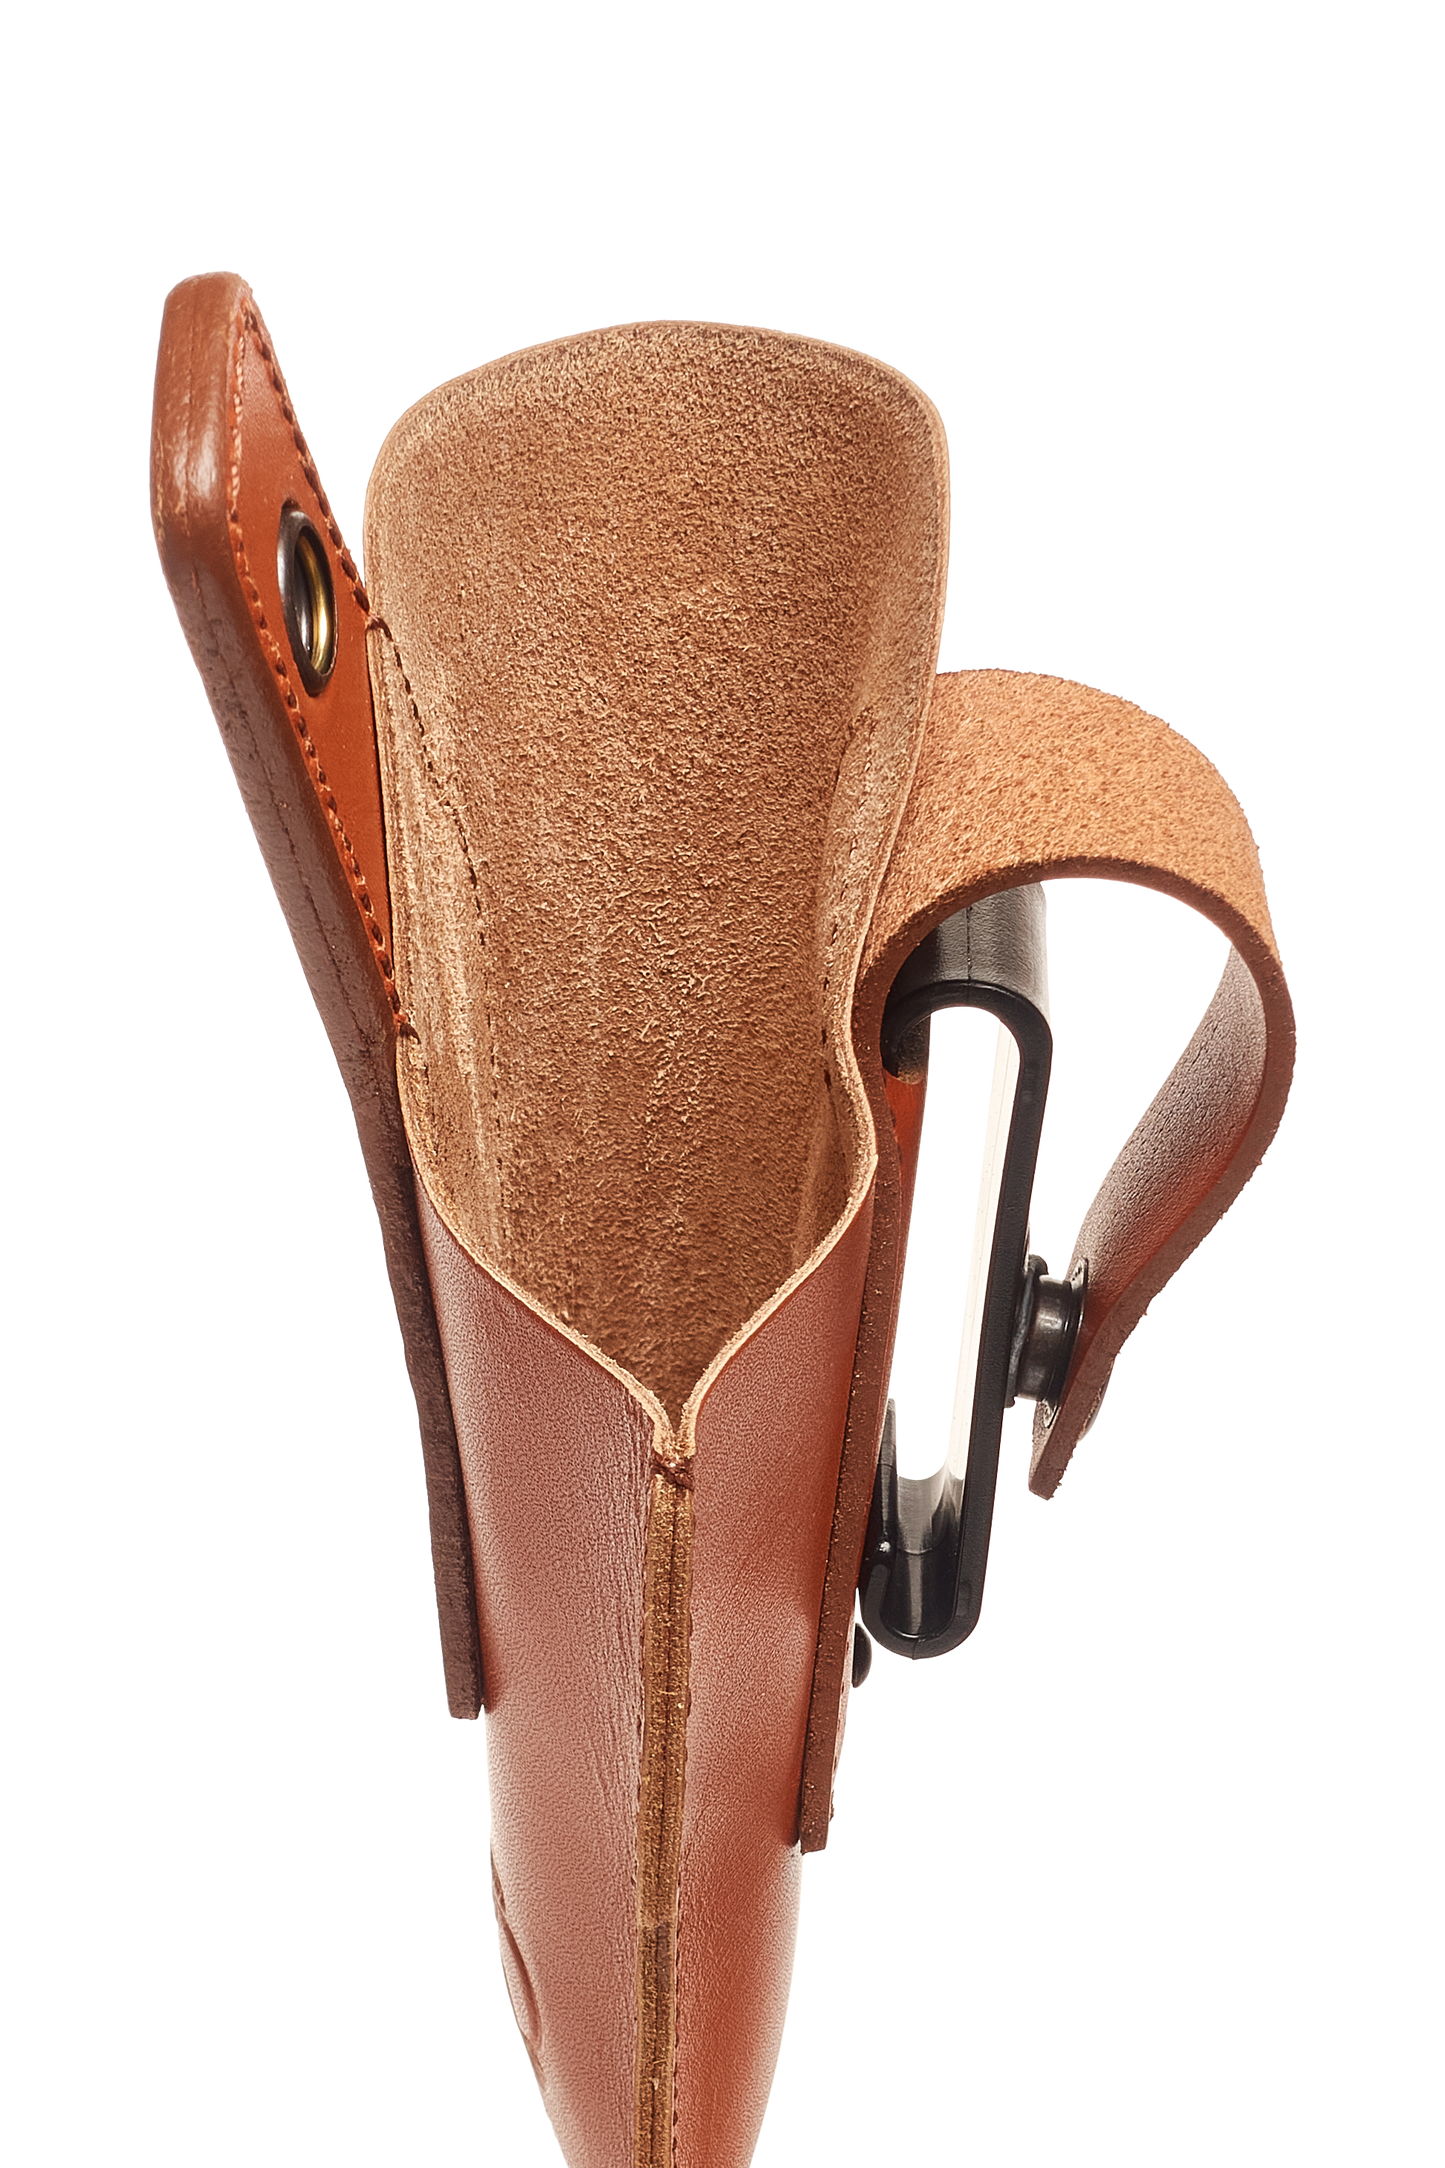 Smith&Wesson 5906 IWB Leather Holster with Belt Clip (K154)